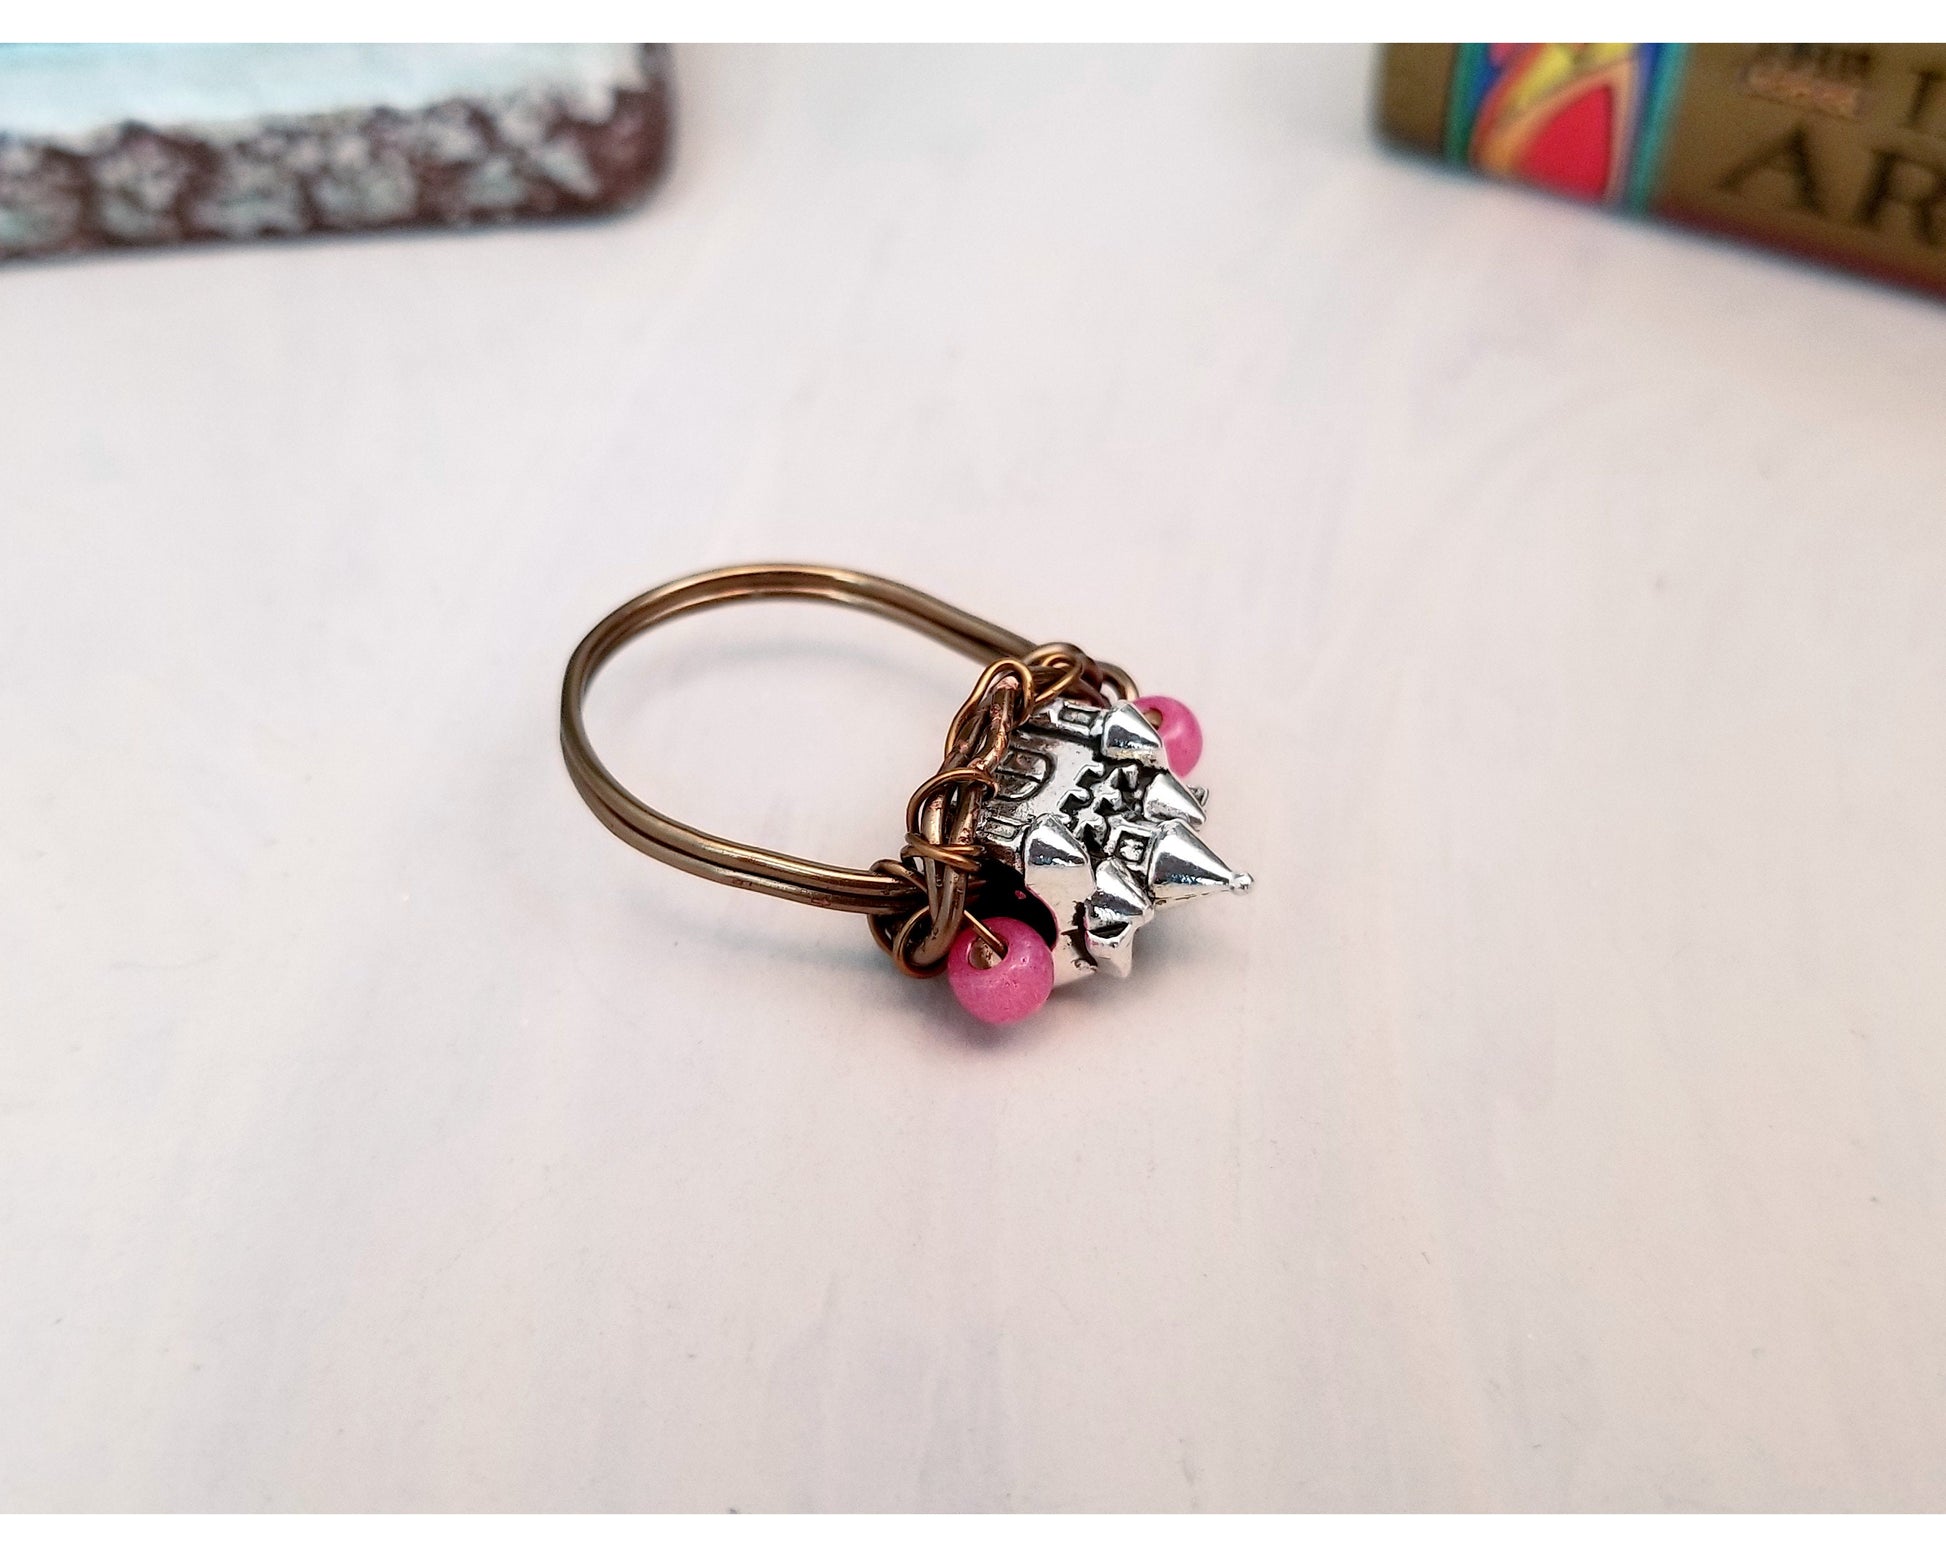 Castle Ring in Pink, Fairy Tale, Wedding, Bridesmaid, Gothic, Renaissance, Medieval, Choice of Colors and Metals